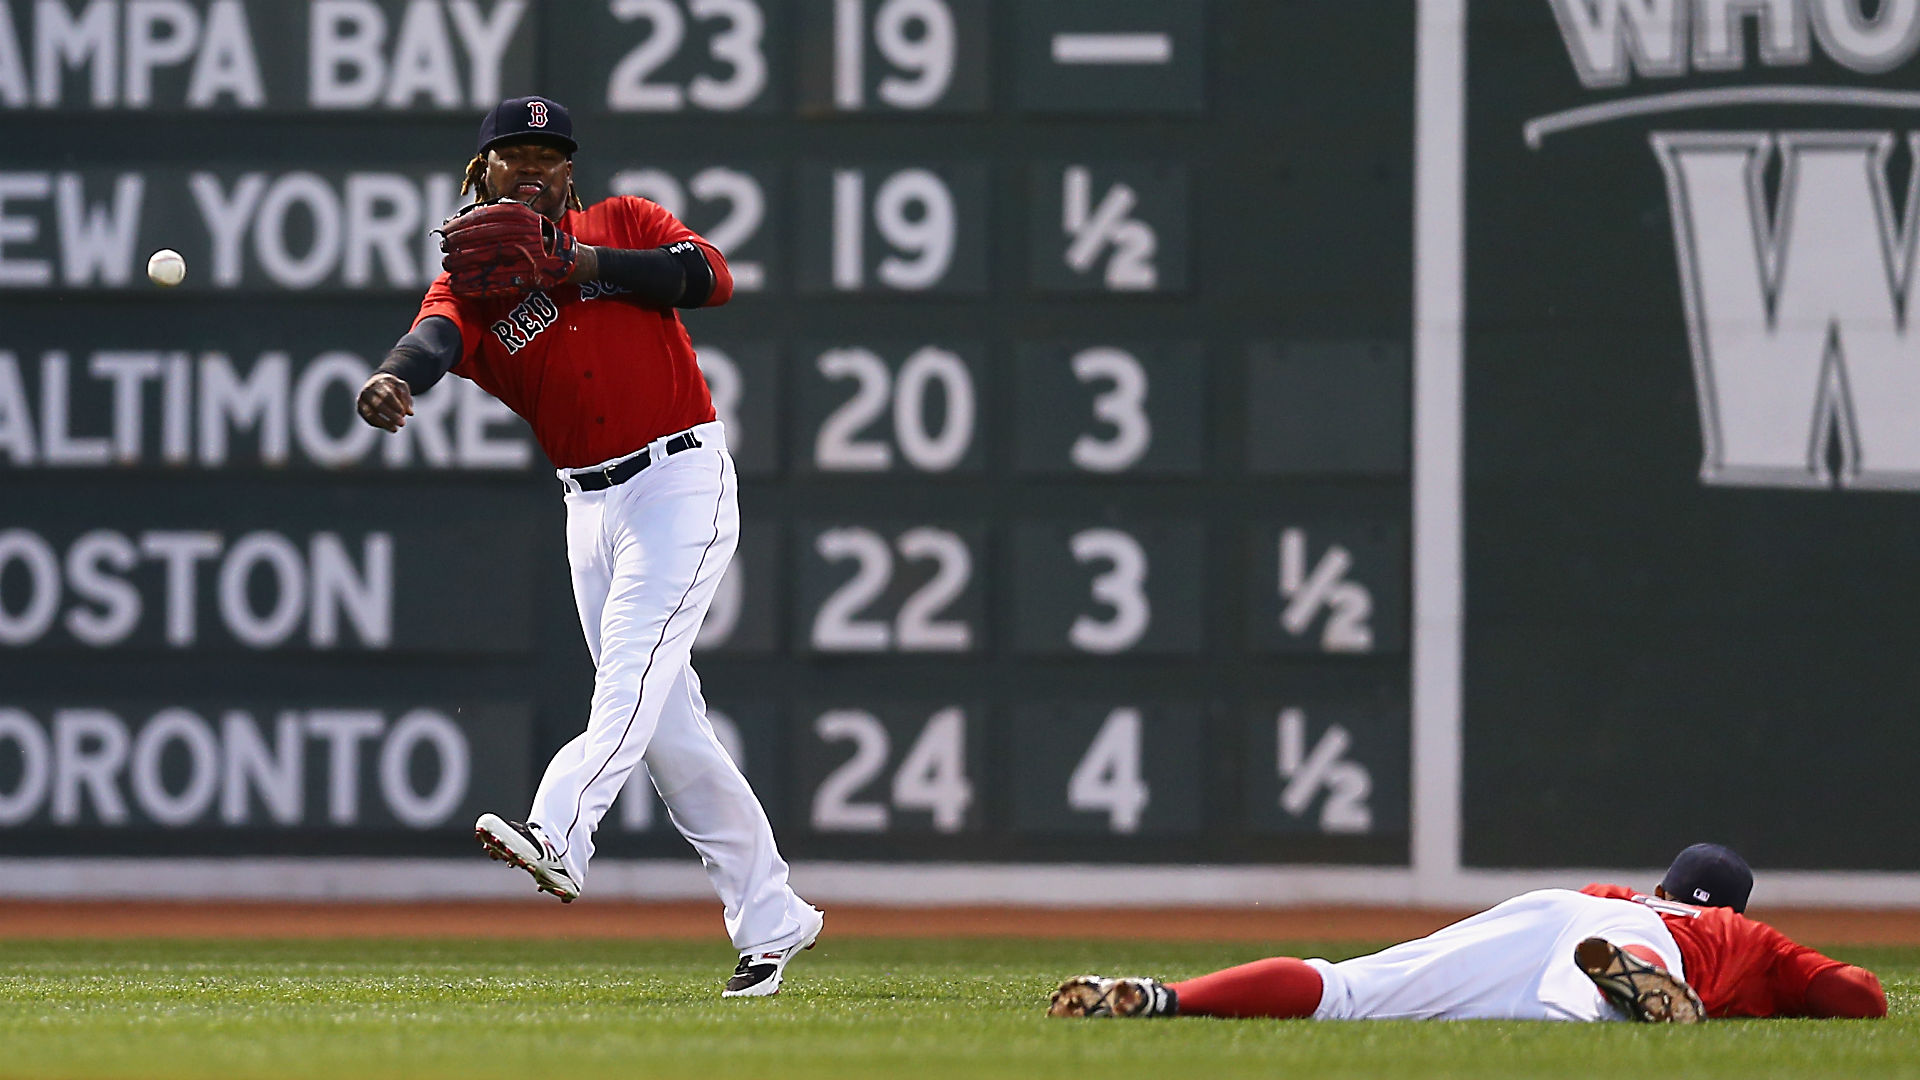 Don T Expect Hanley Ramirez To Be Better As A First Baseman